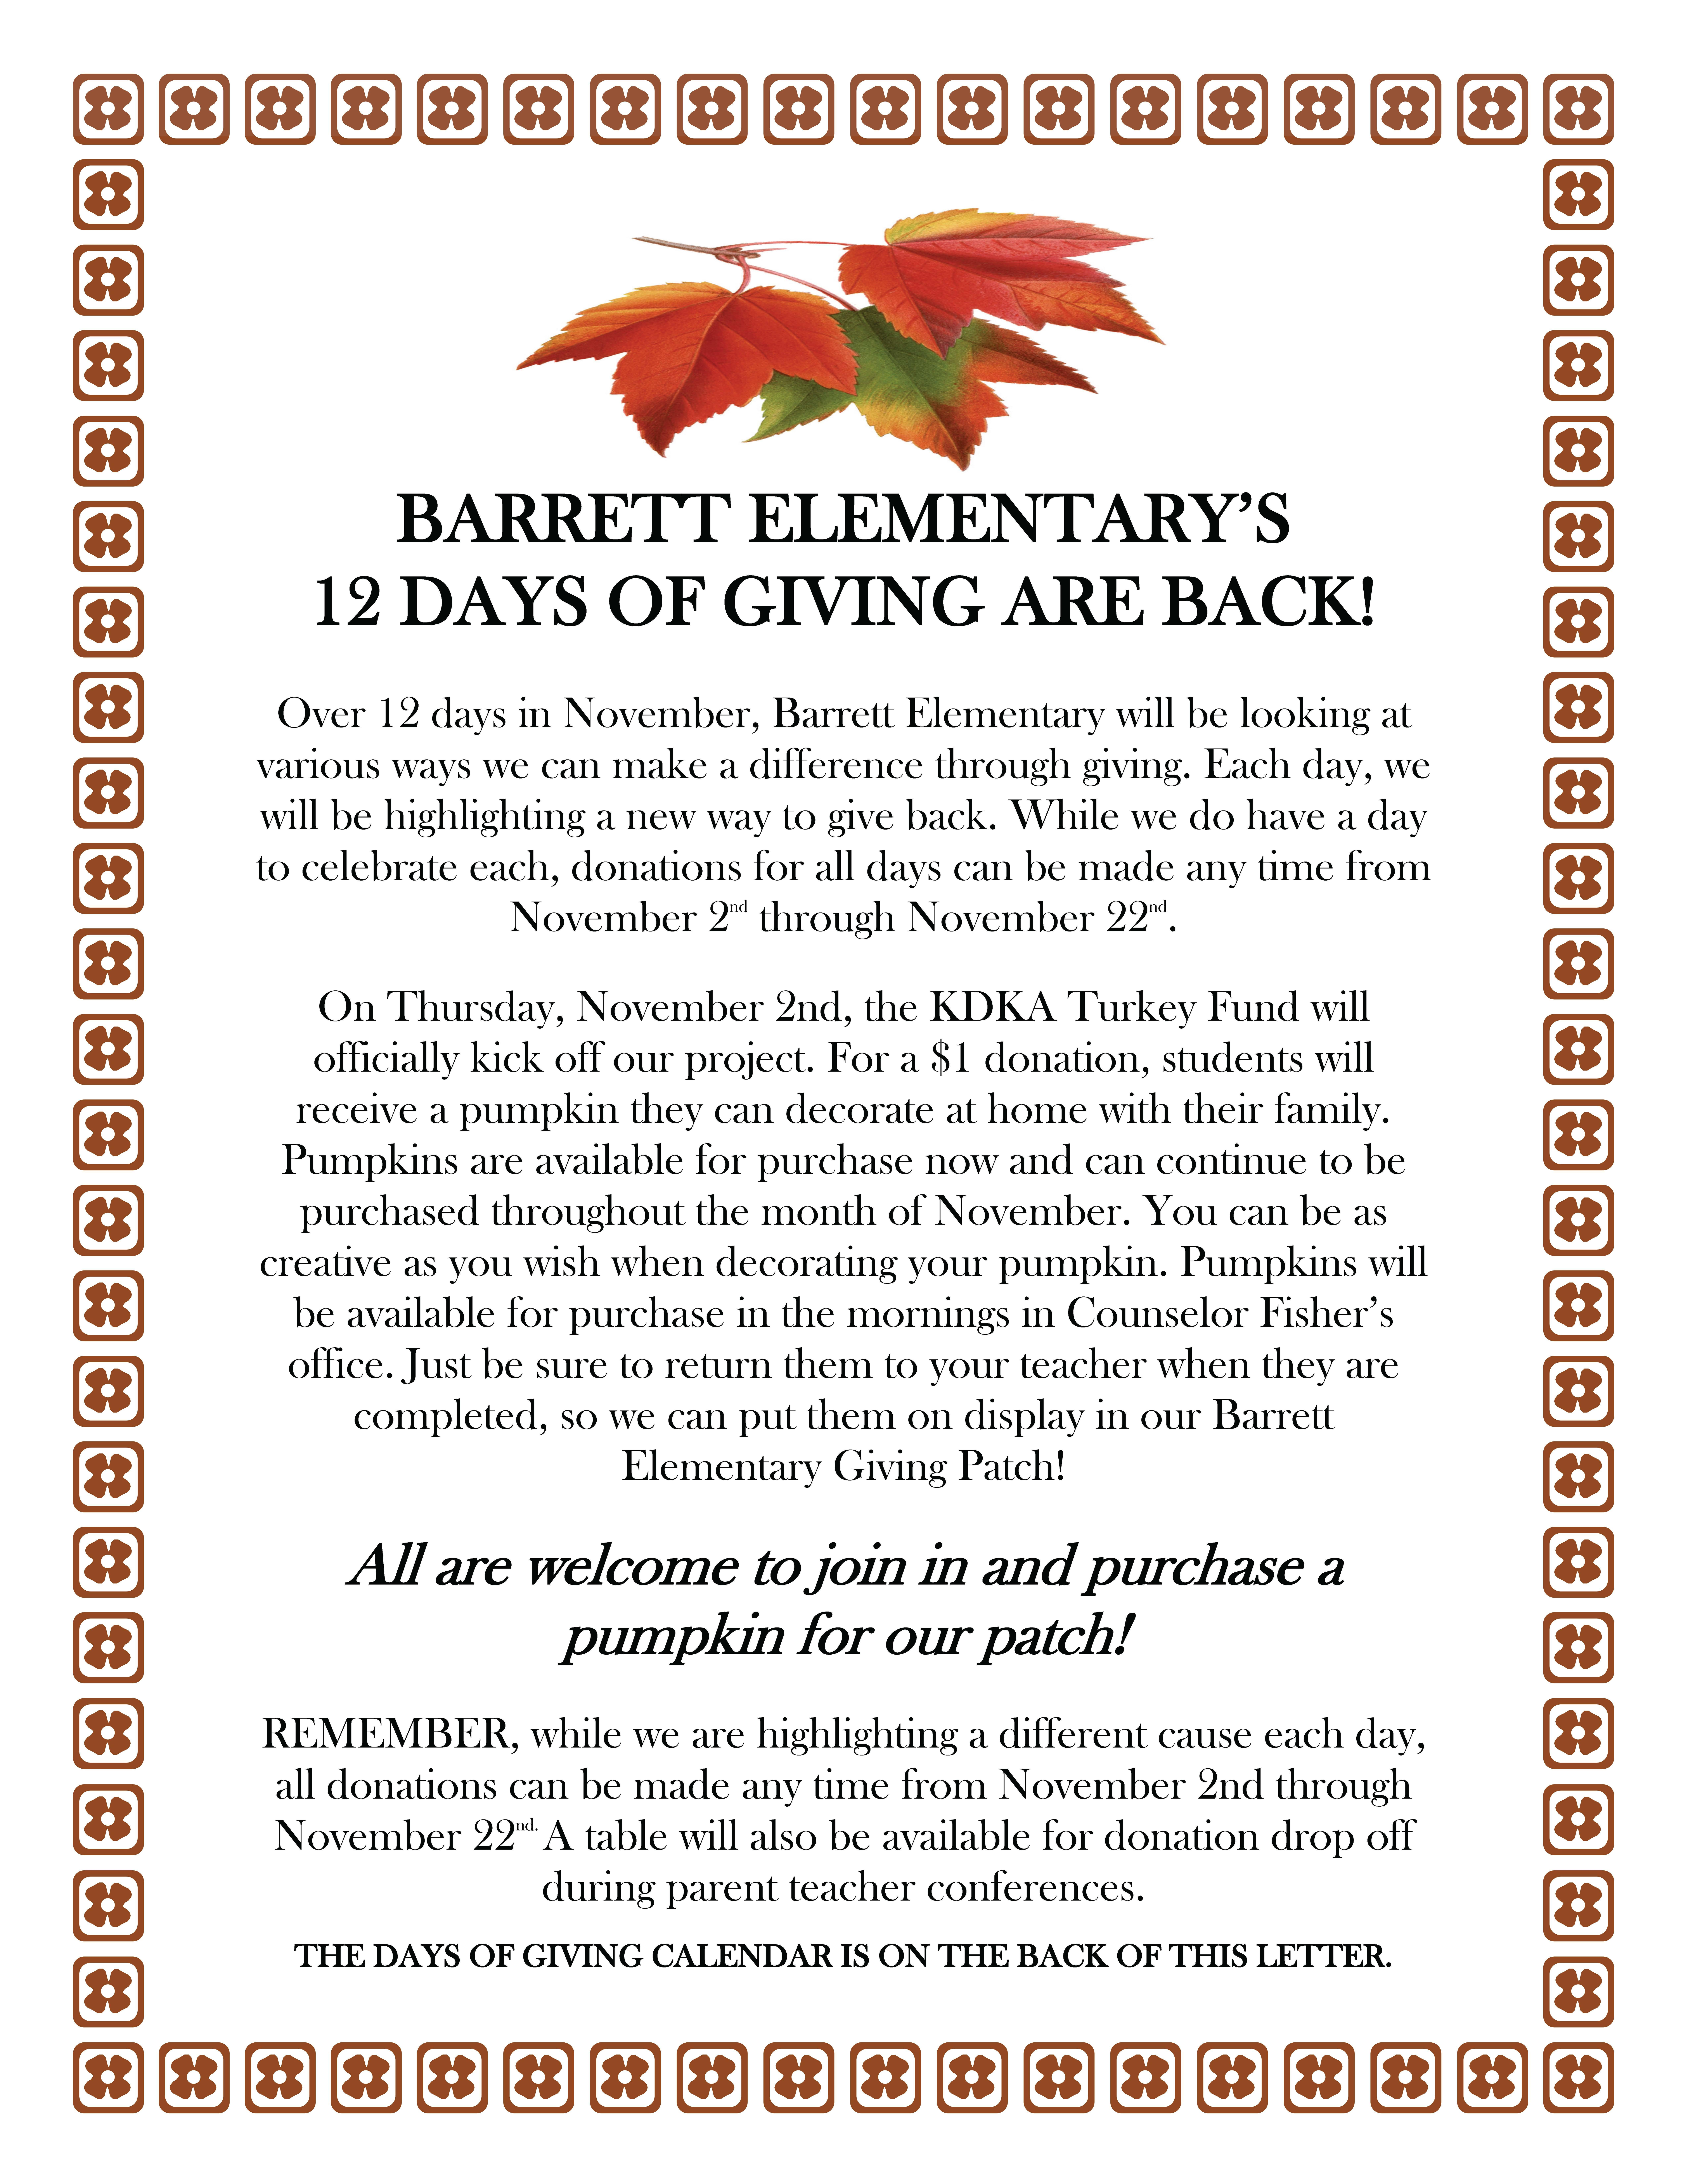 12 Days of Giving Project Details